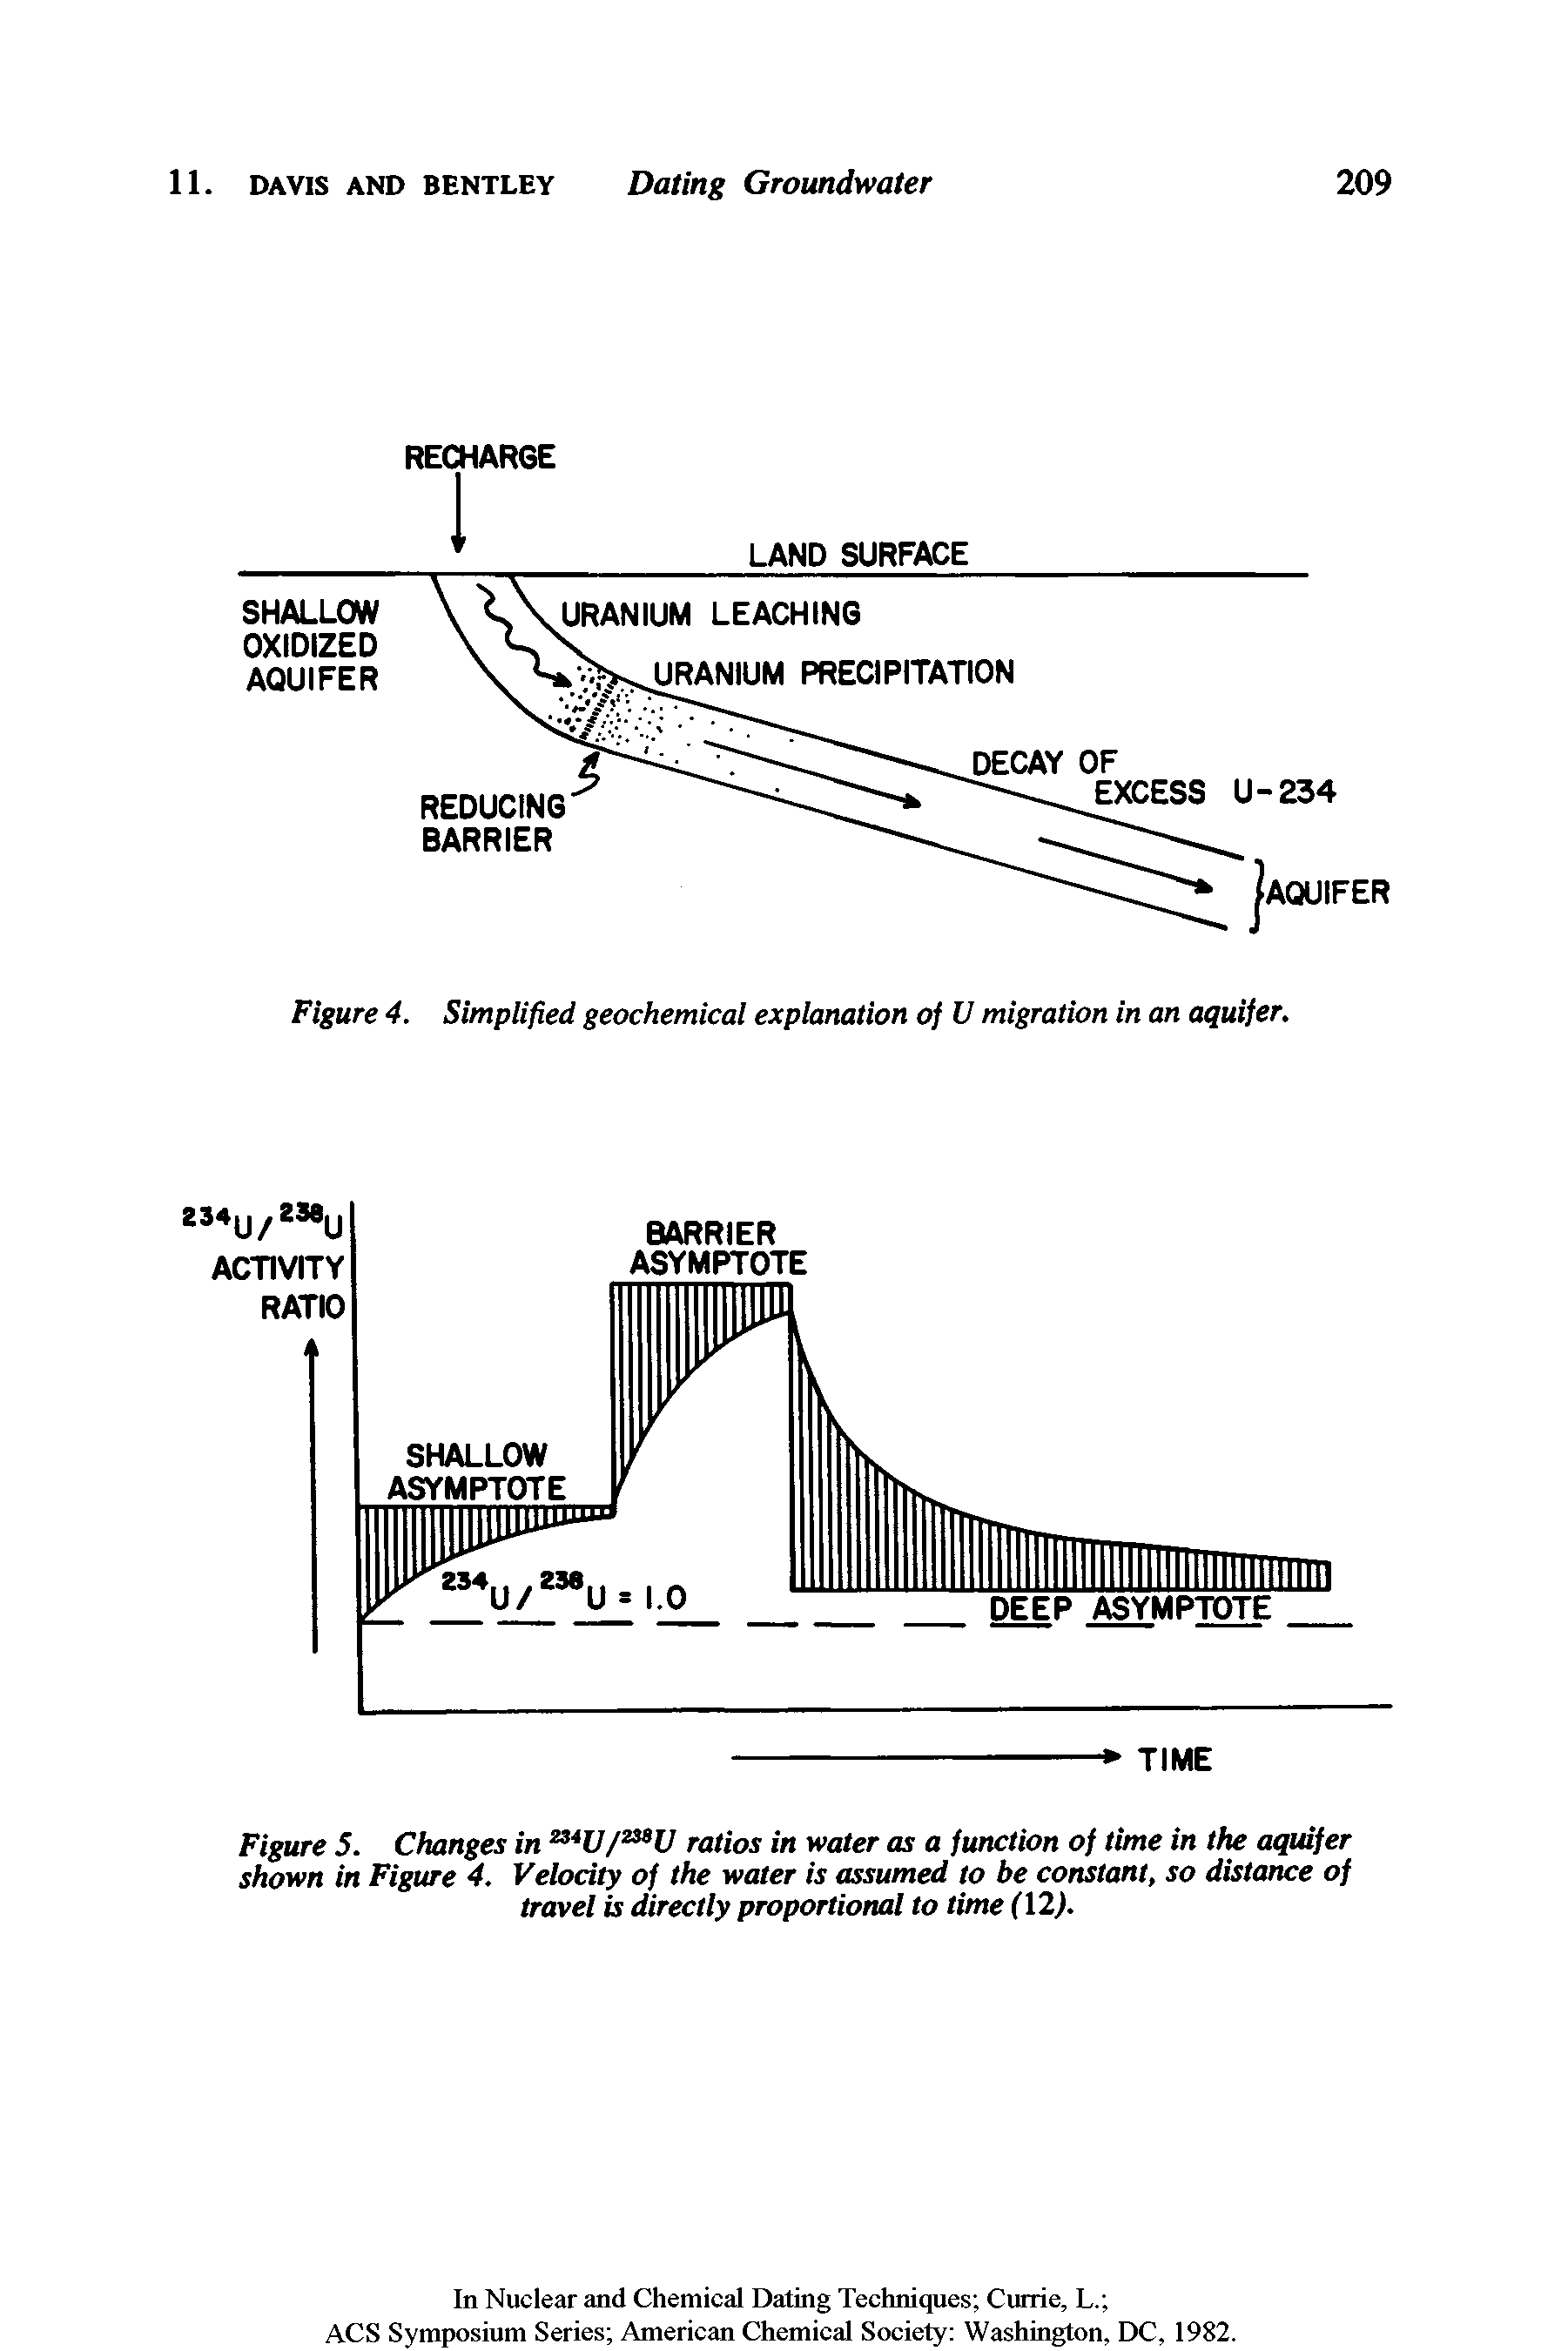 Figure 5. Changes in 23, C//23St/ ratios in water as a function of time in the aquifer shown in Figure 4. Velocity of the water is assumed to be constant, so distance of travel is directly proportional to time (12).